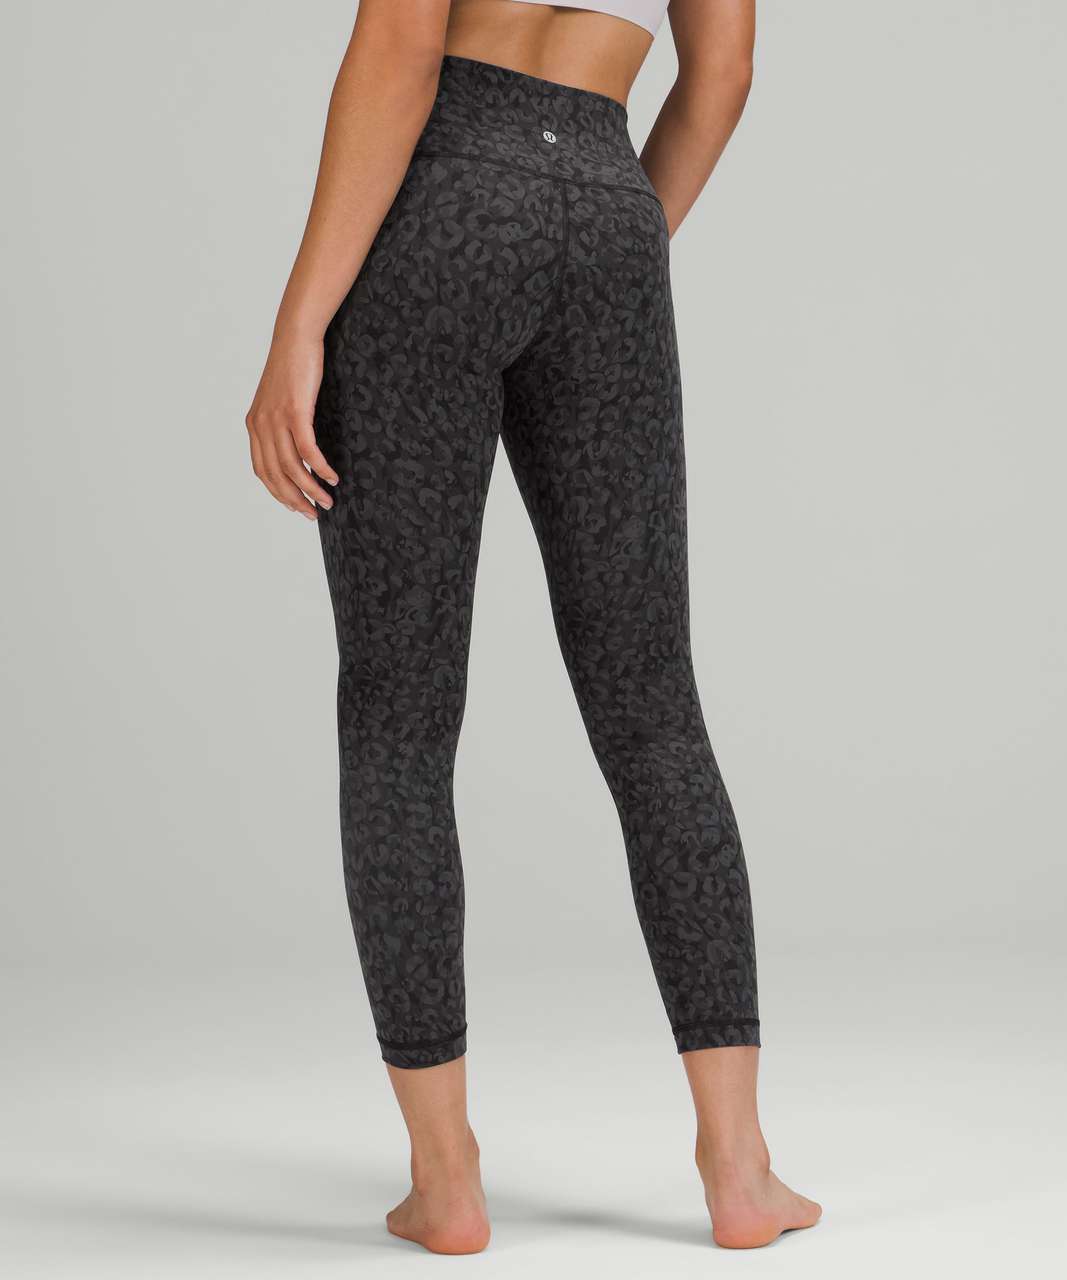 Lululemon Wunder Under High-Rise Tight 25" *Full-On Luxtreme - Intertwined Camo Deep Coal Multi